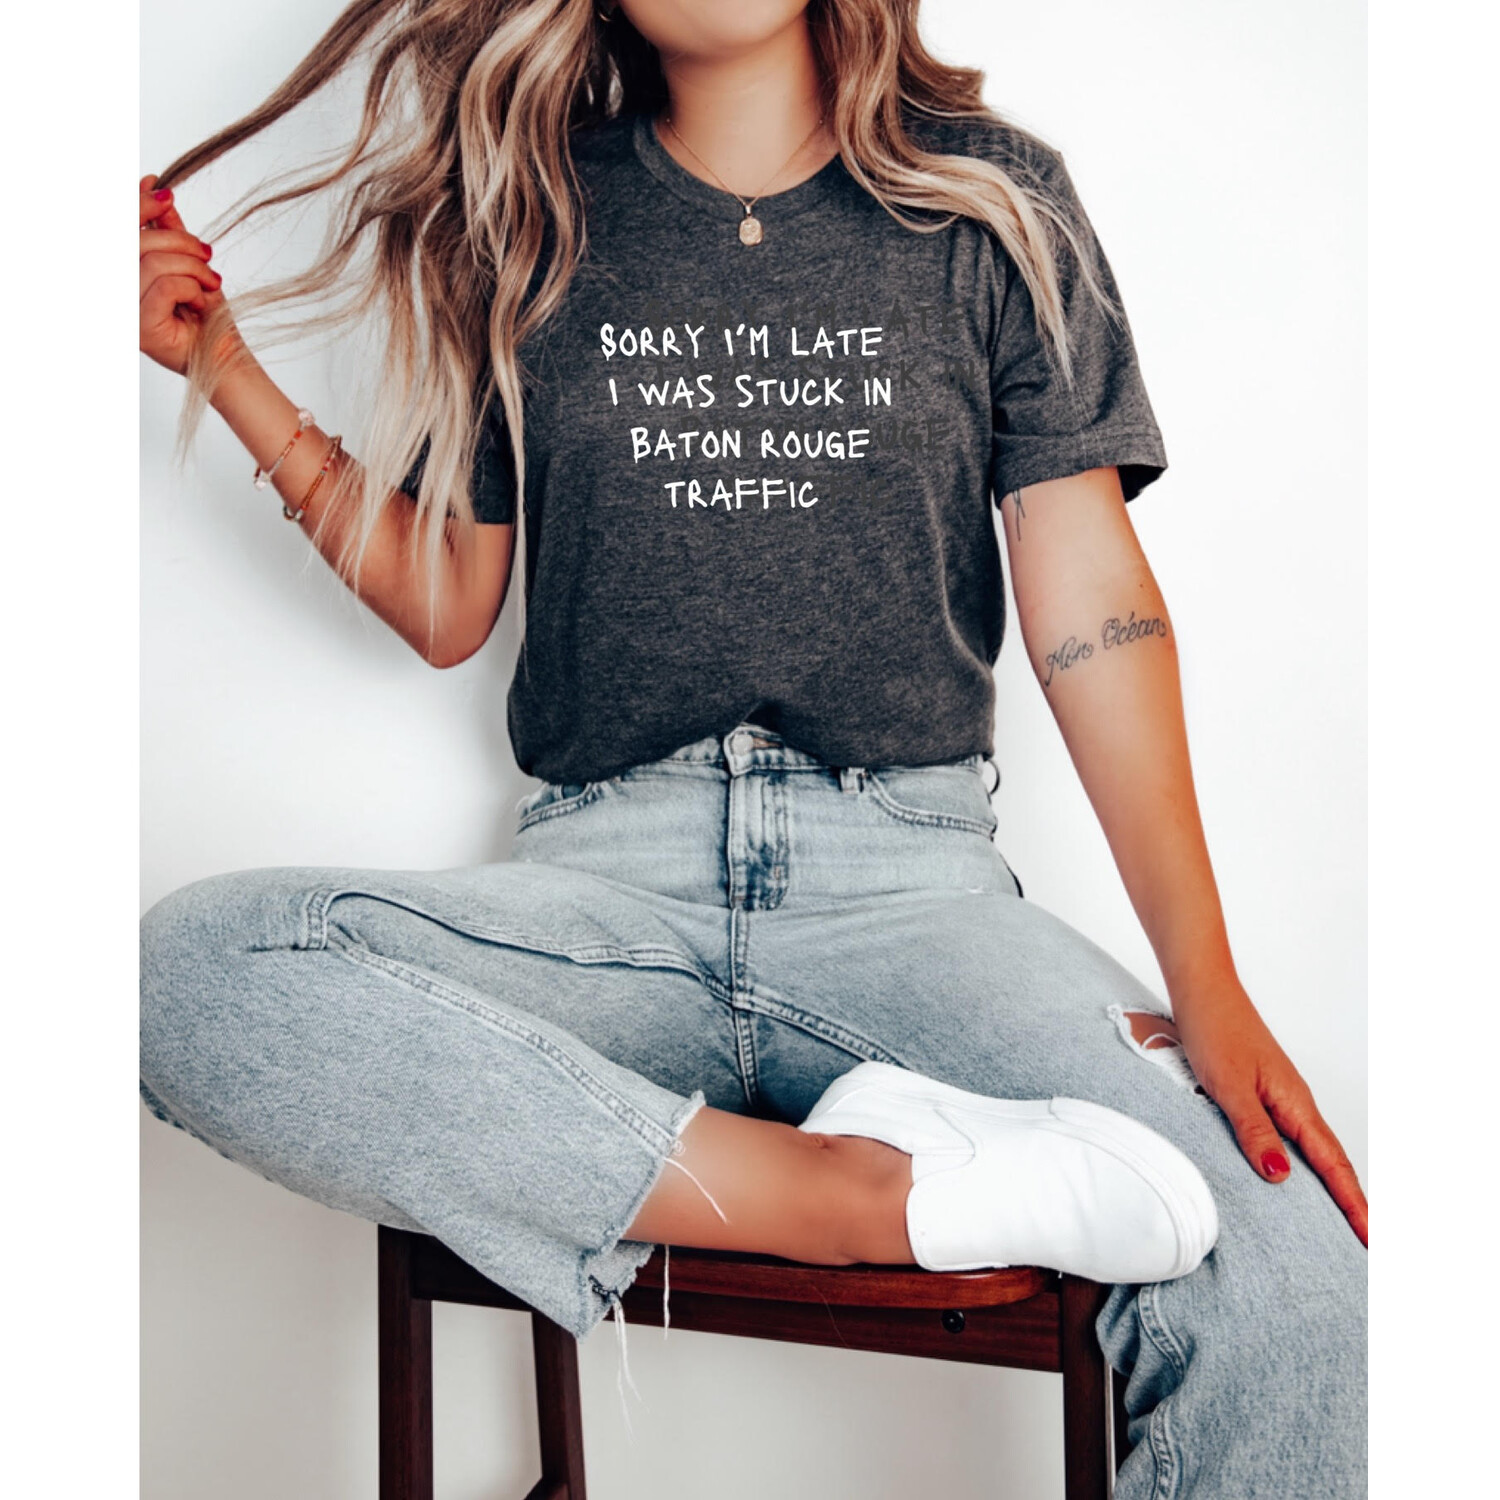 FRIENDS merch finds at Typo, - I Am The Girl Who Travels